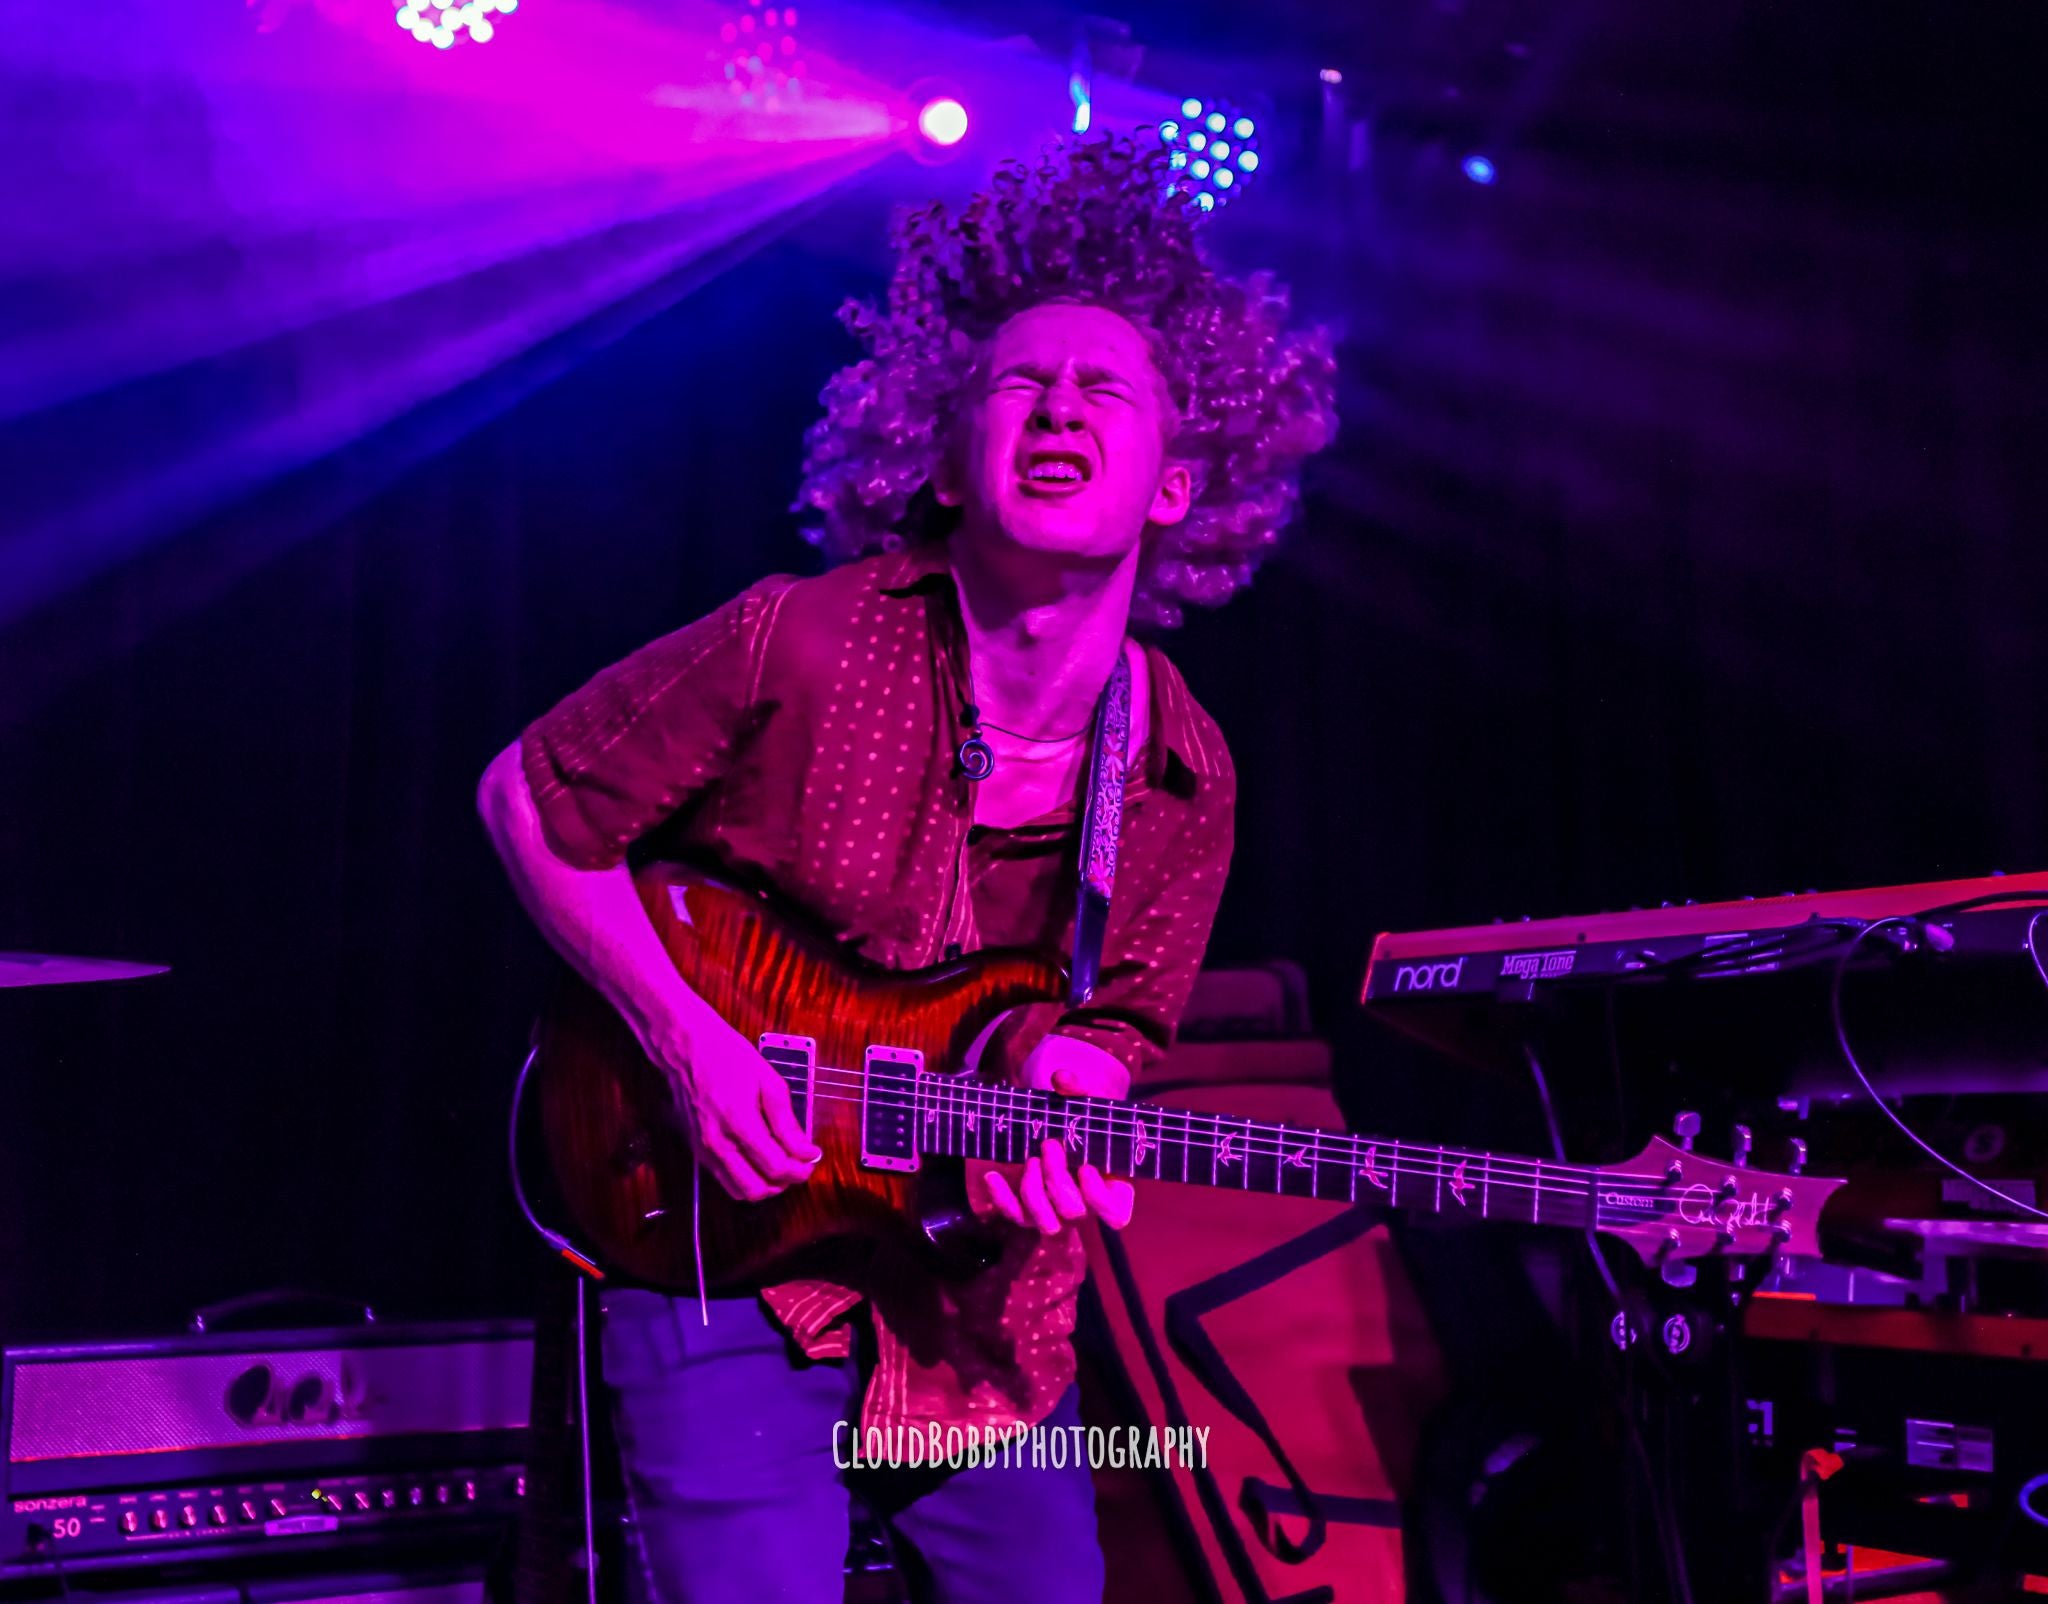 Isaac Hadden making a solid stank face as he shreds his guitar on a colorfully lit indoor stage. 